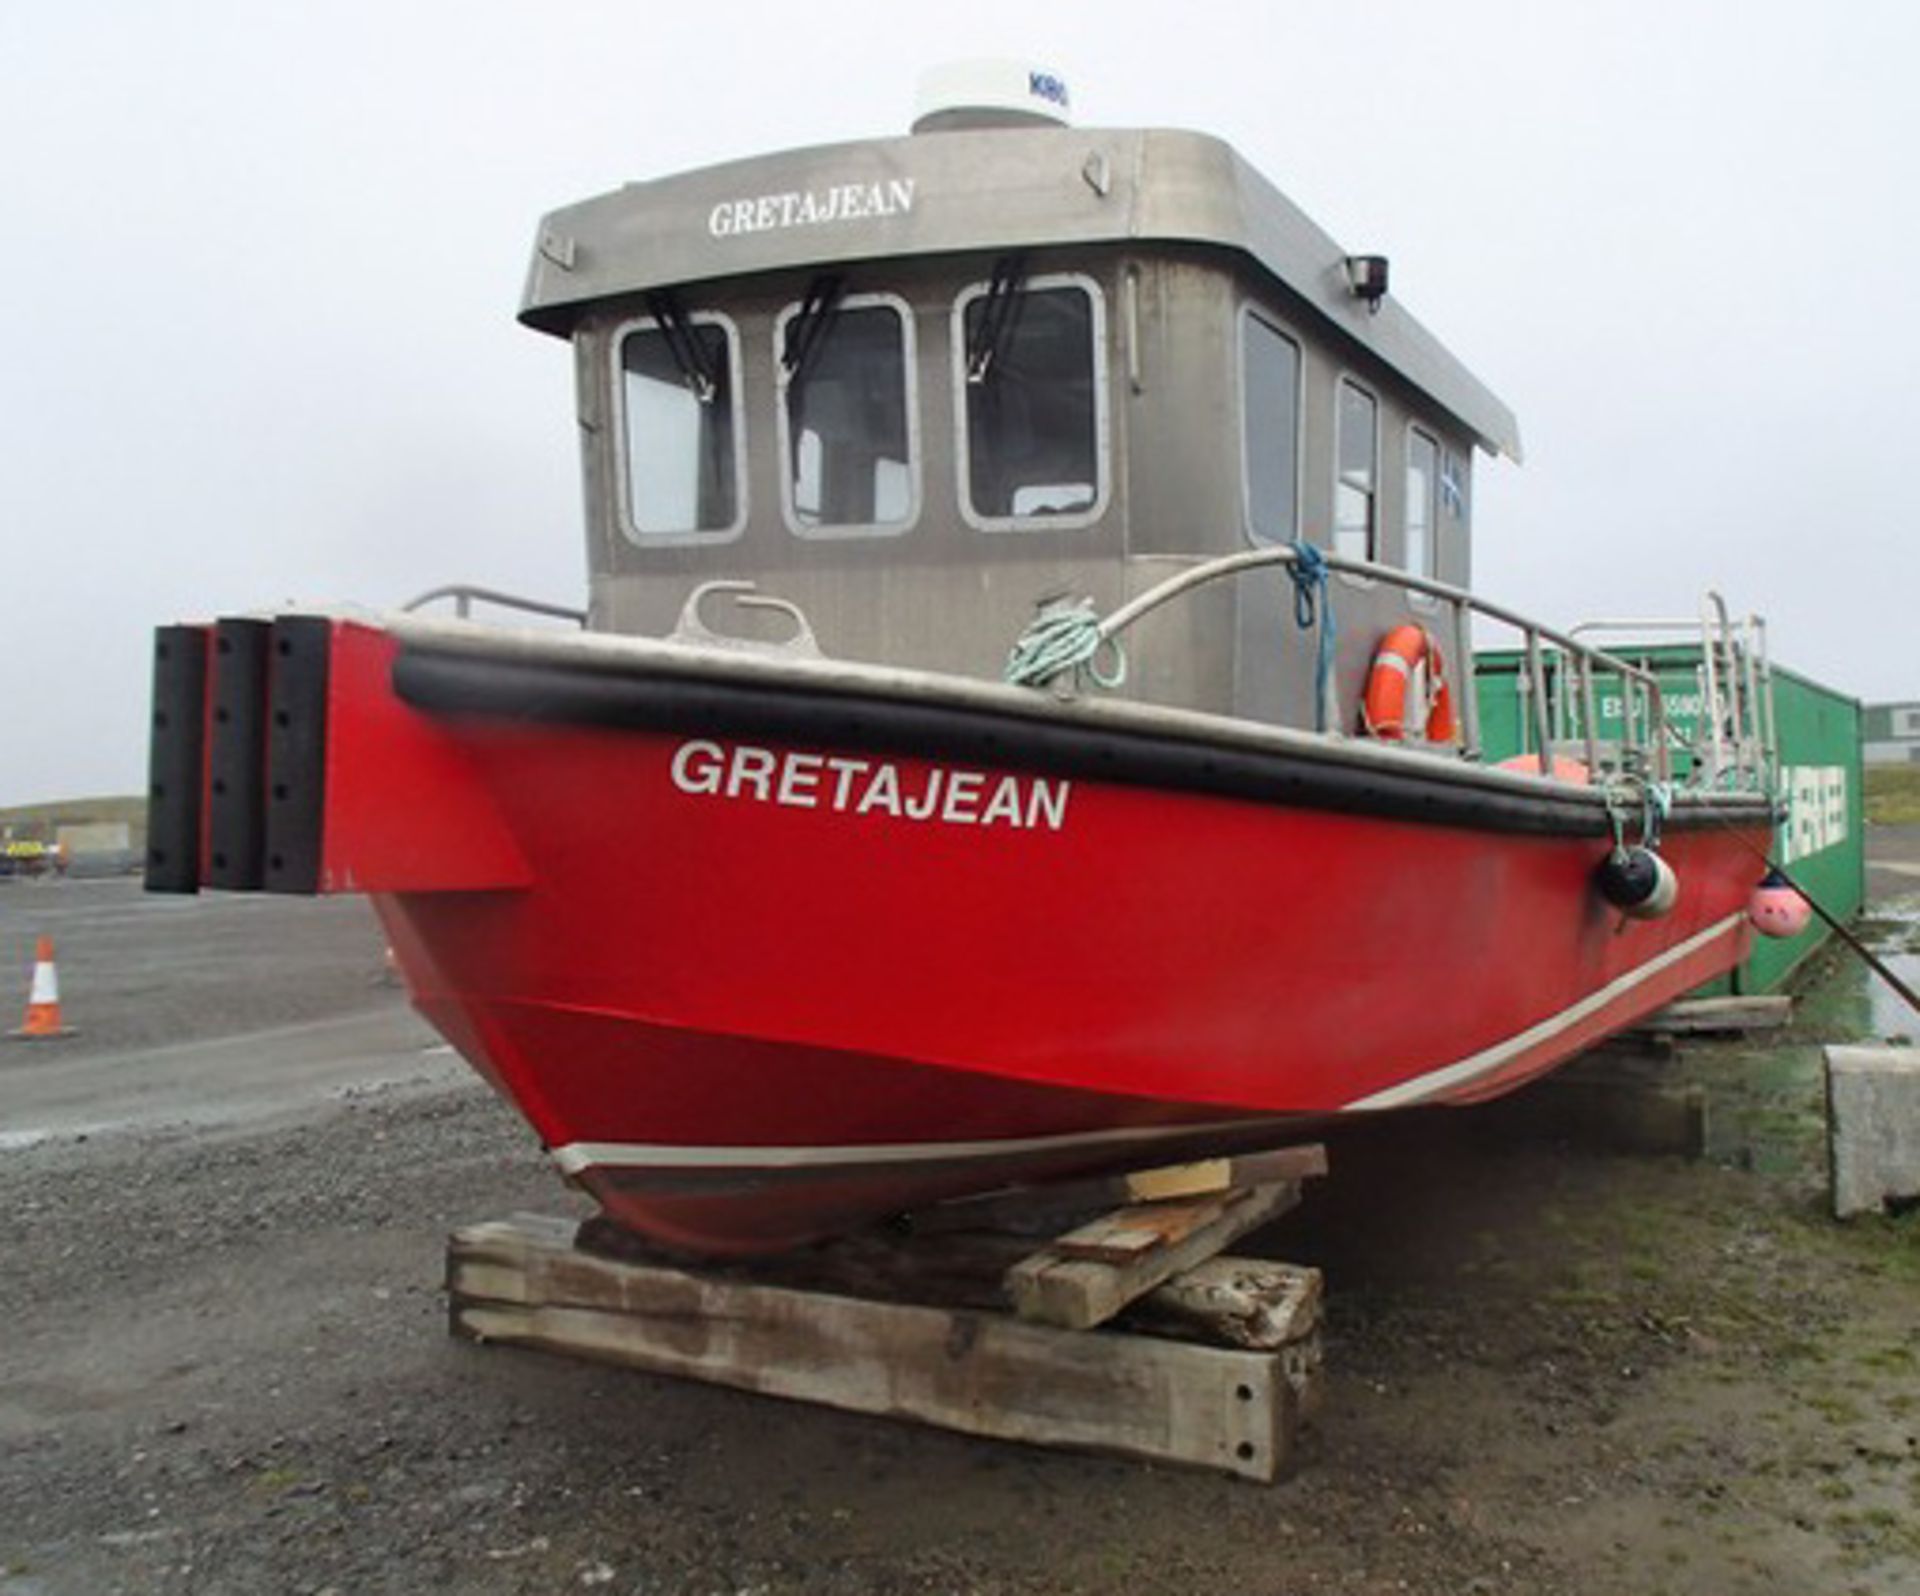 2013 30FT ALUMINIUM VOE BOAT BUILT BY MALAKOFF IN LERWICK. SPECIFICALLY DESIGNED FOR INSHORE SURVEY